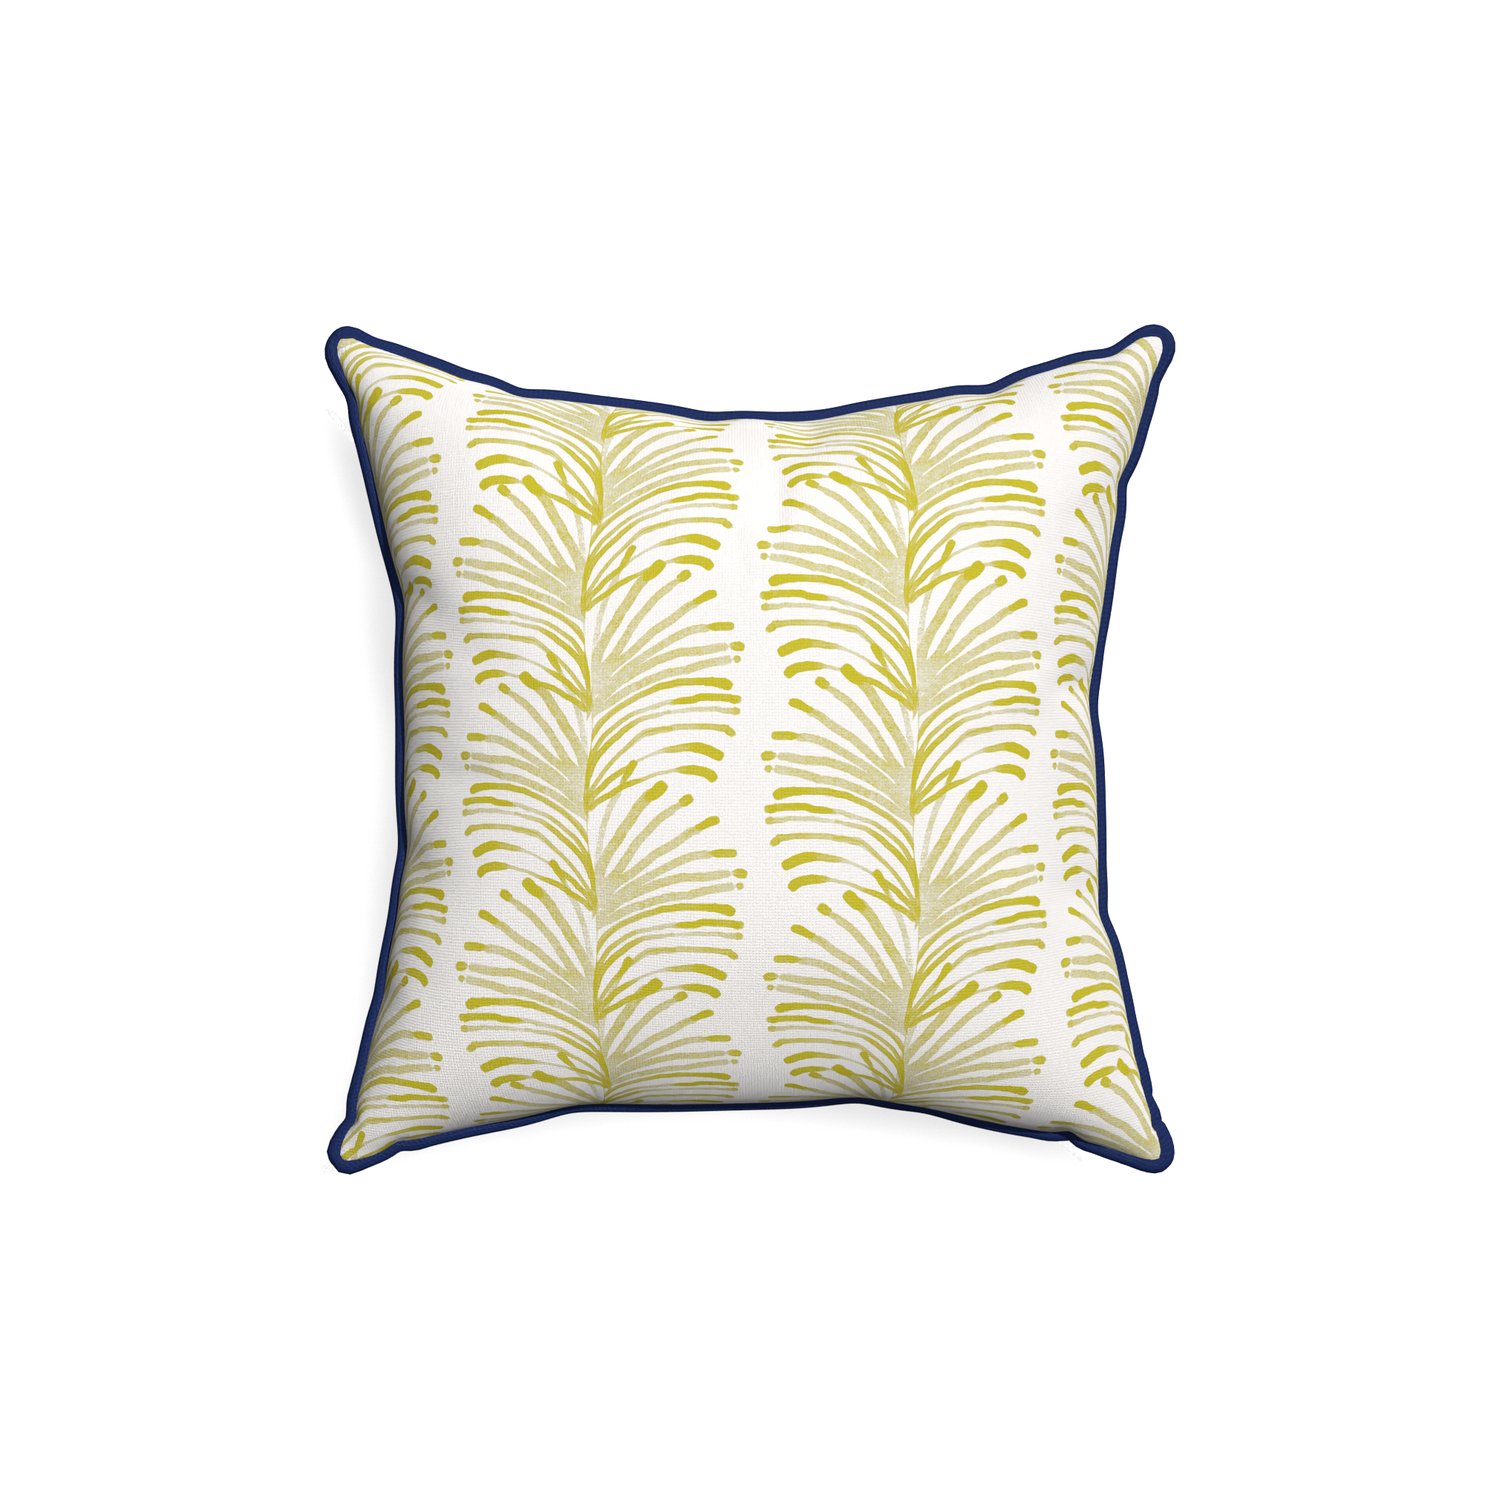 18-square emma chartreuse custom yellow stripe chartreusepillow with midnight piping on white background